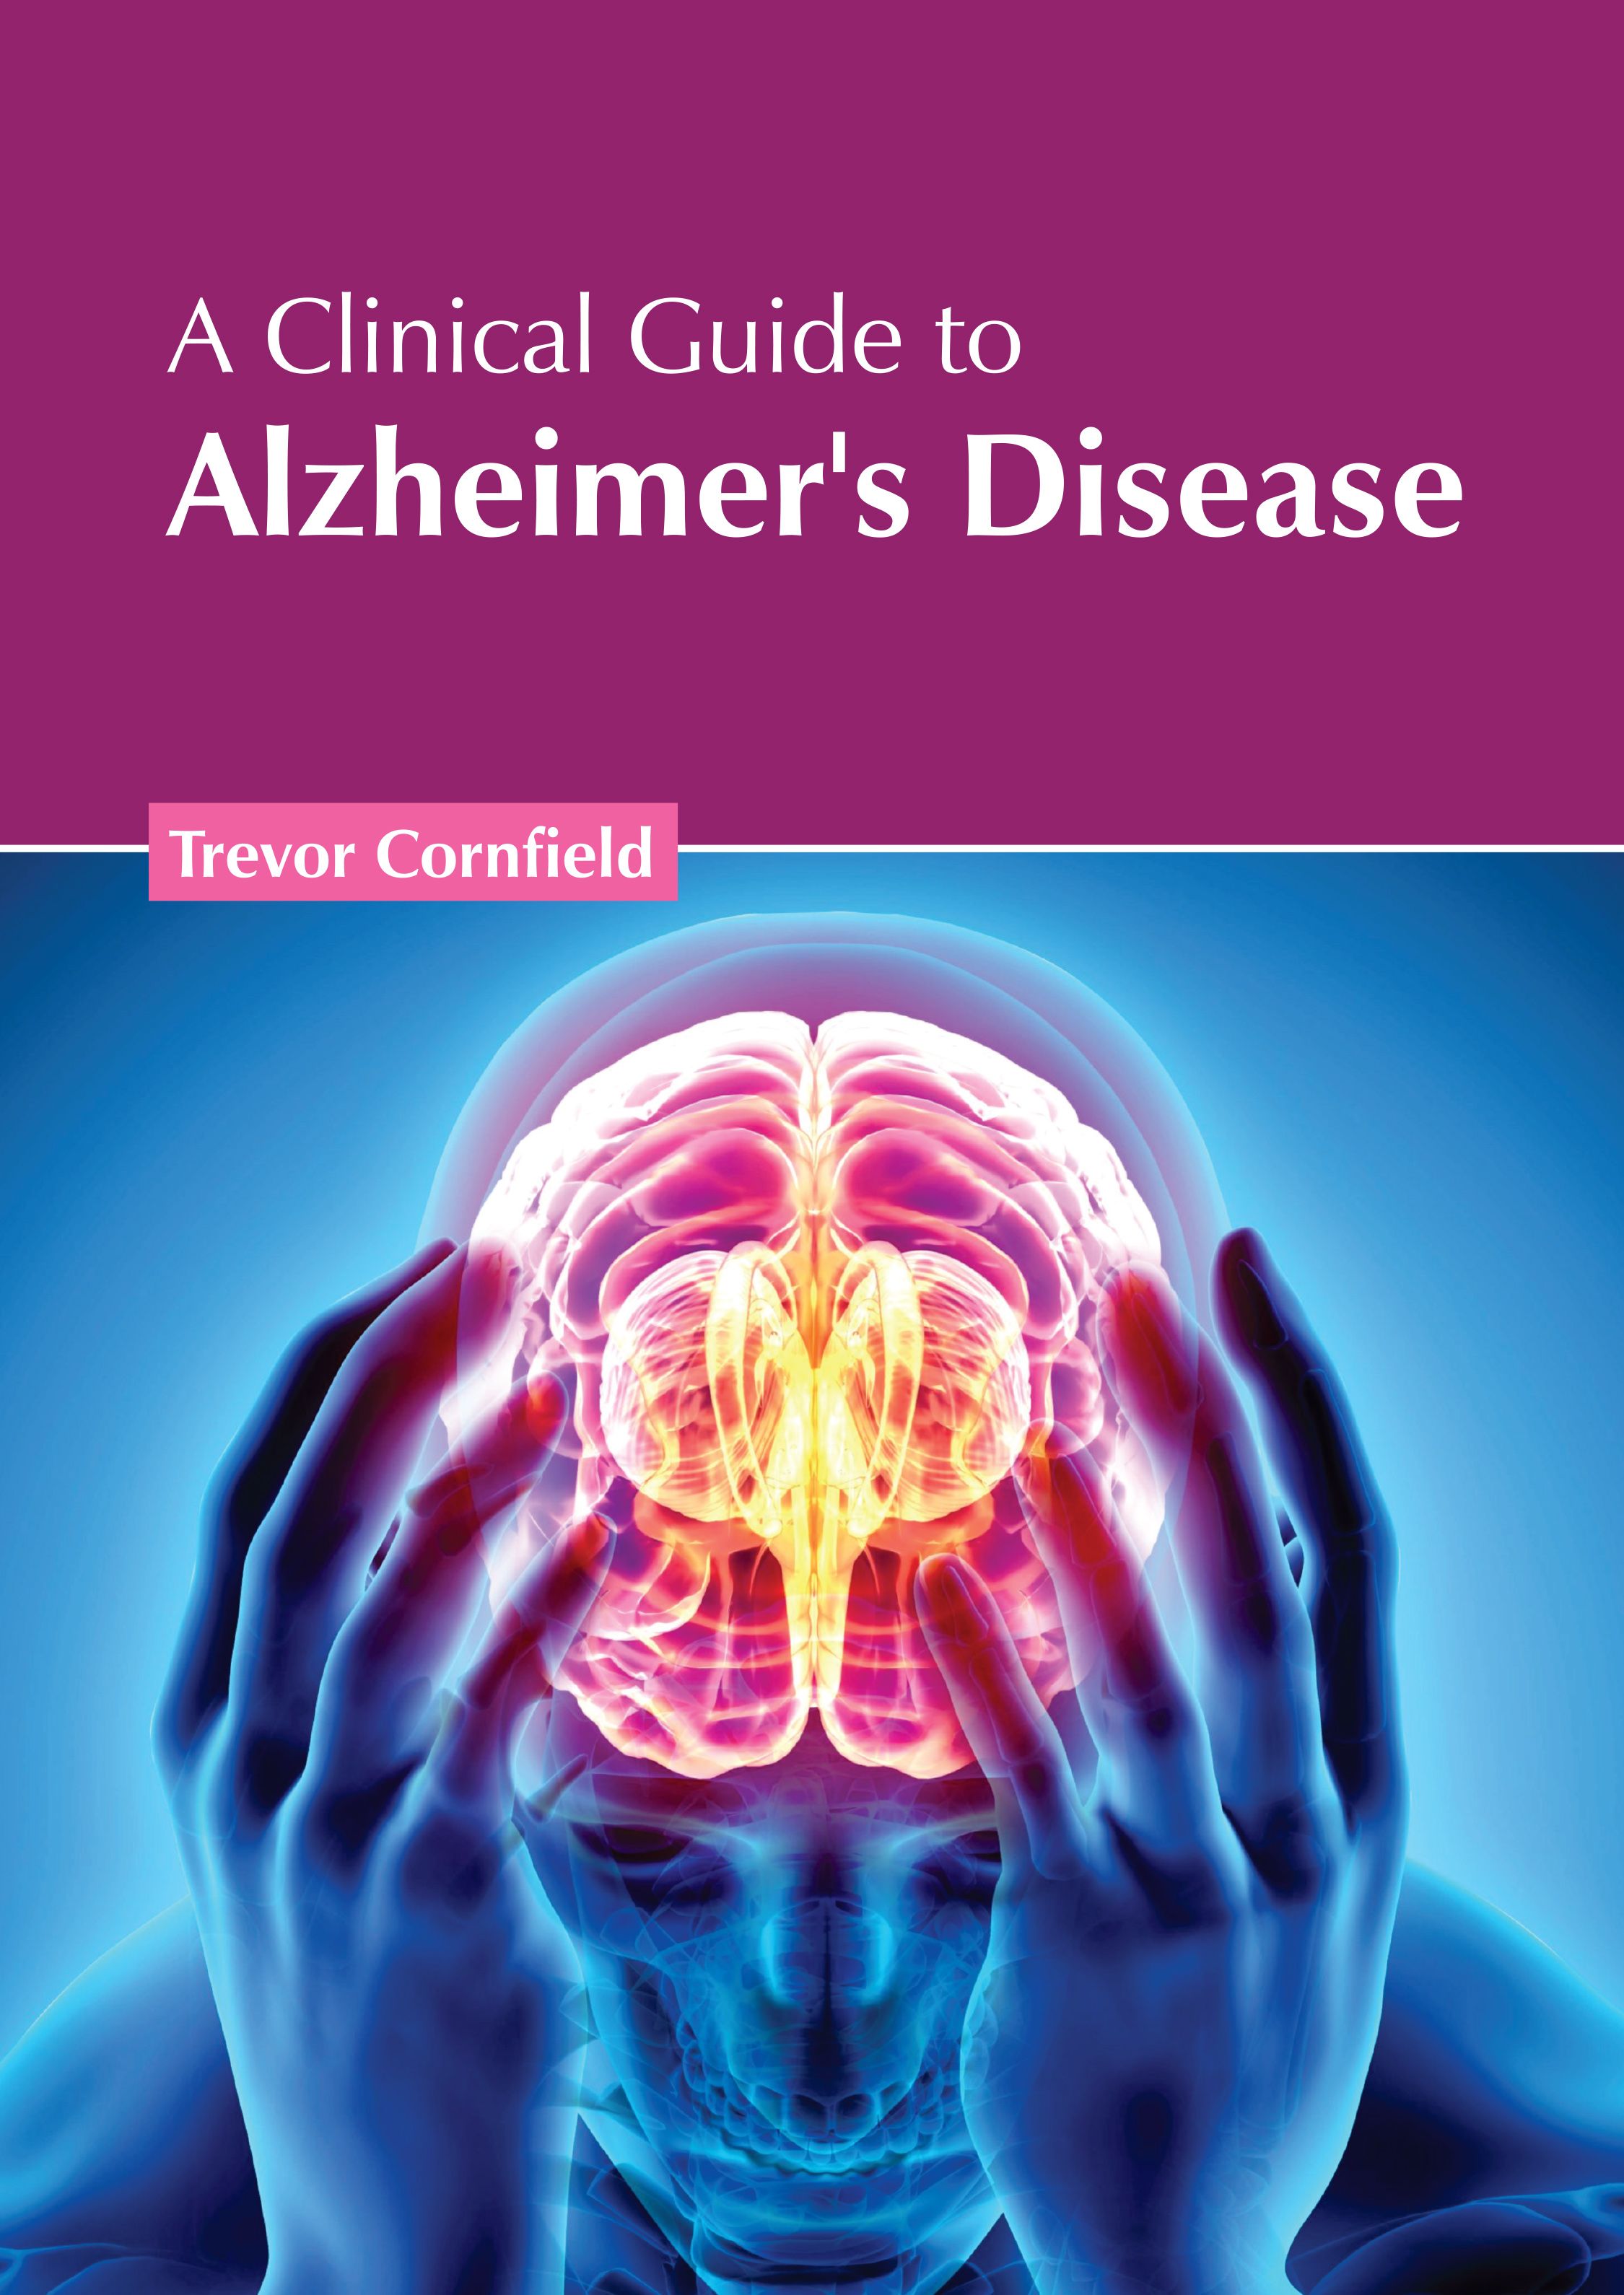 

exclusive-publishers/american-medical-publishers/a-clinical-guide-to-alzheimer-s-disease-9781639278350